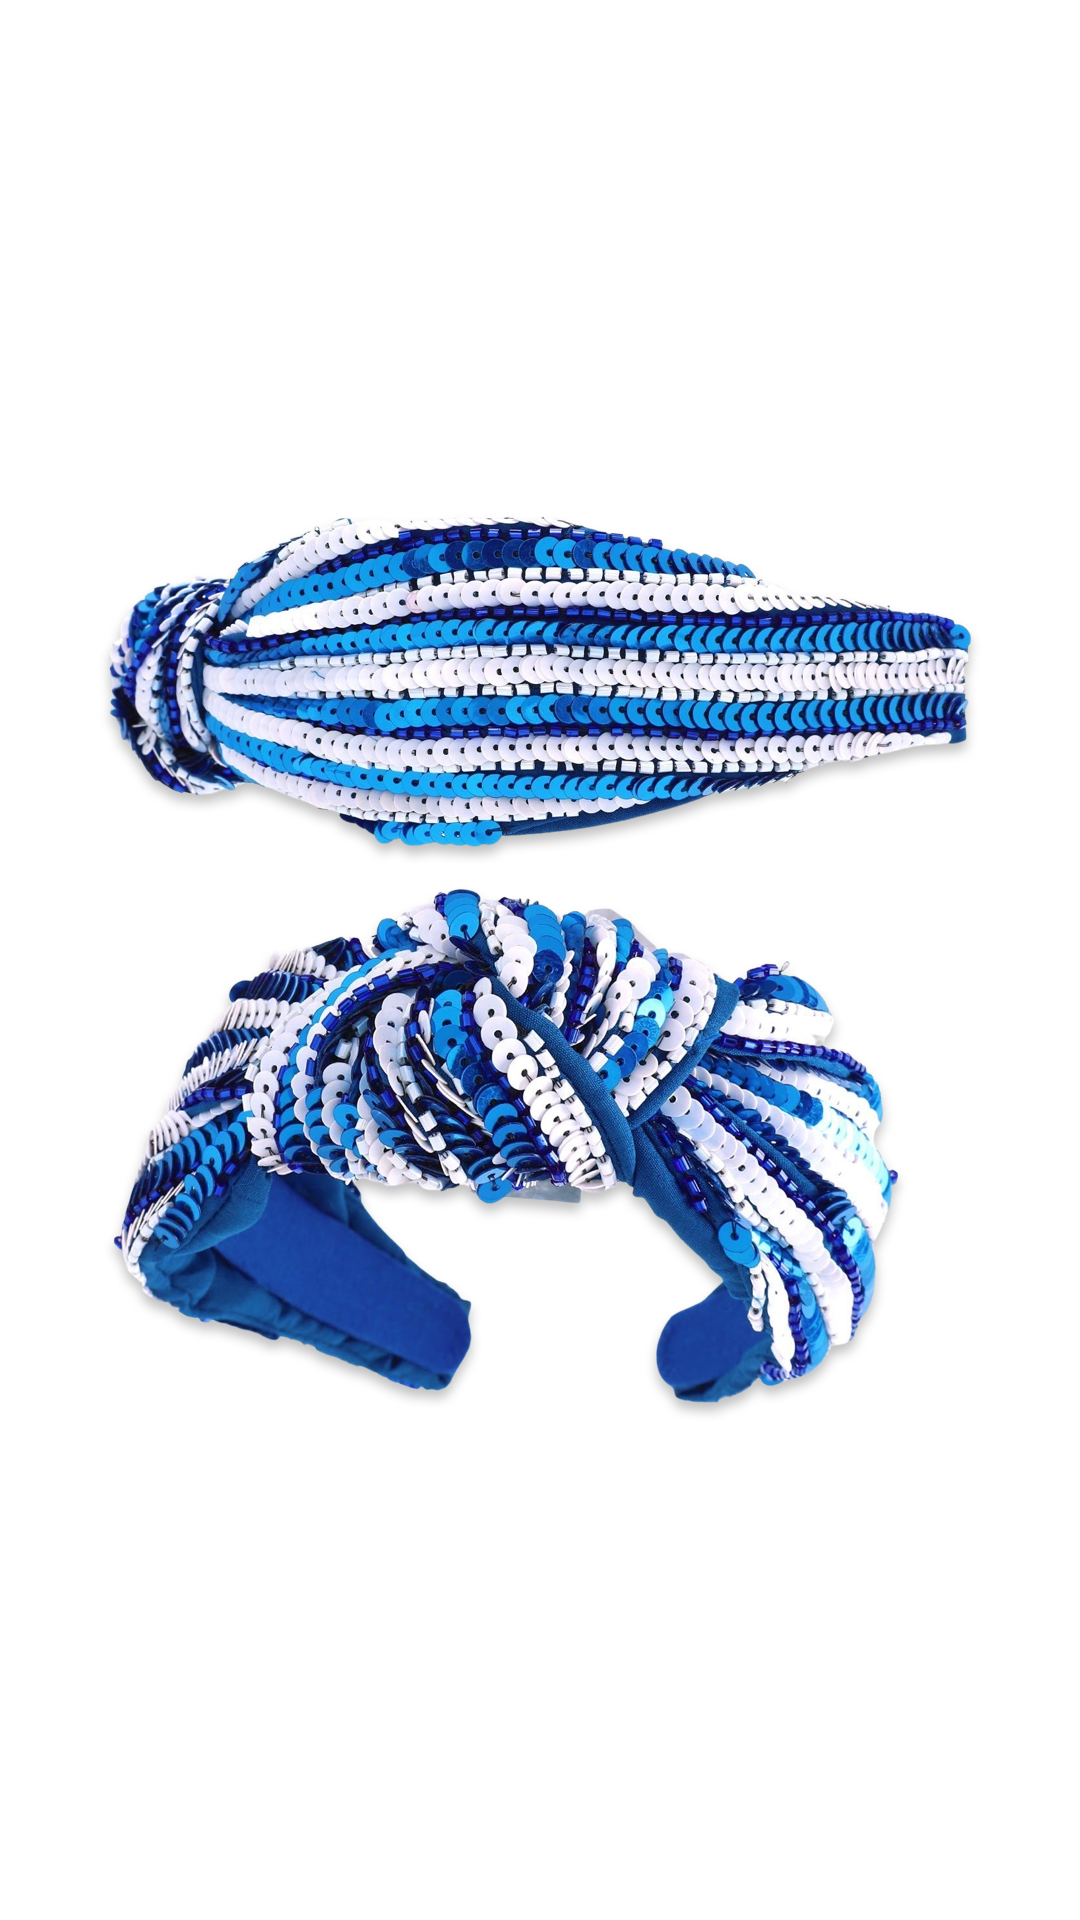 Team Color Stripe Sequin Knotted Headband